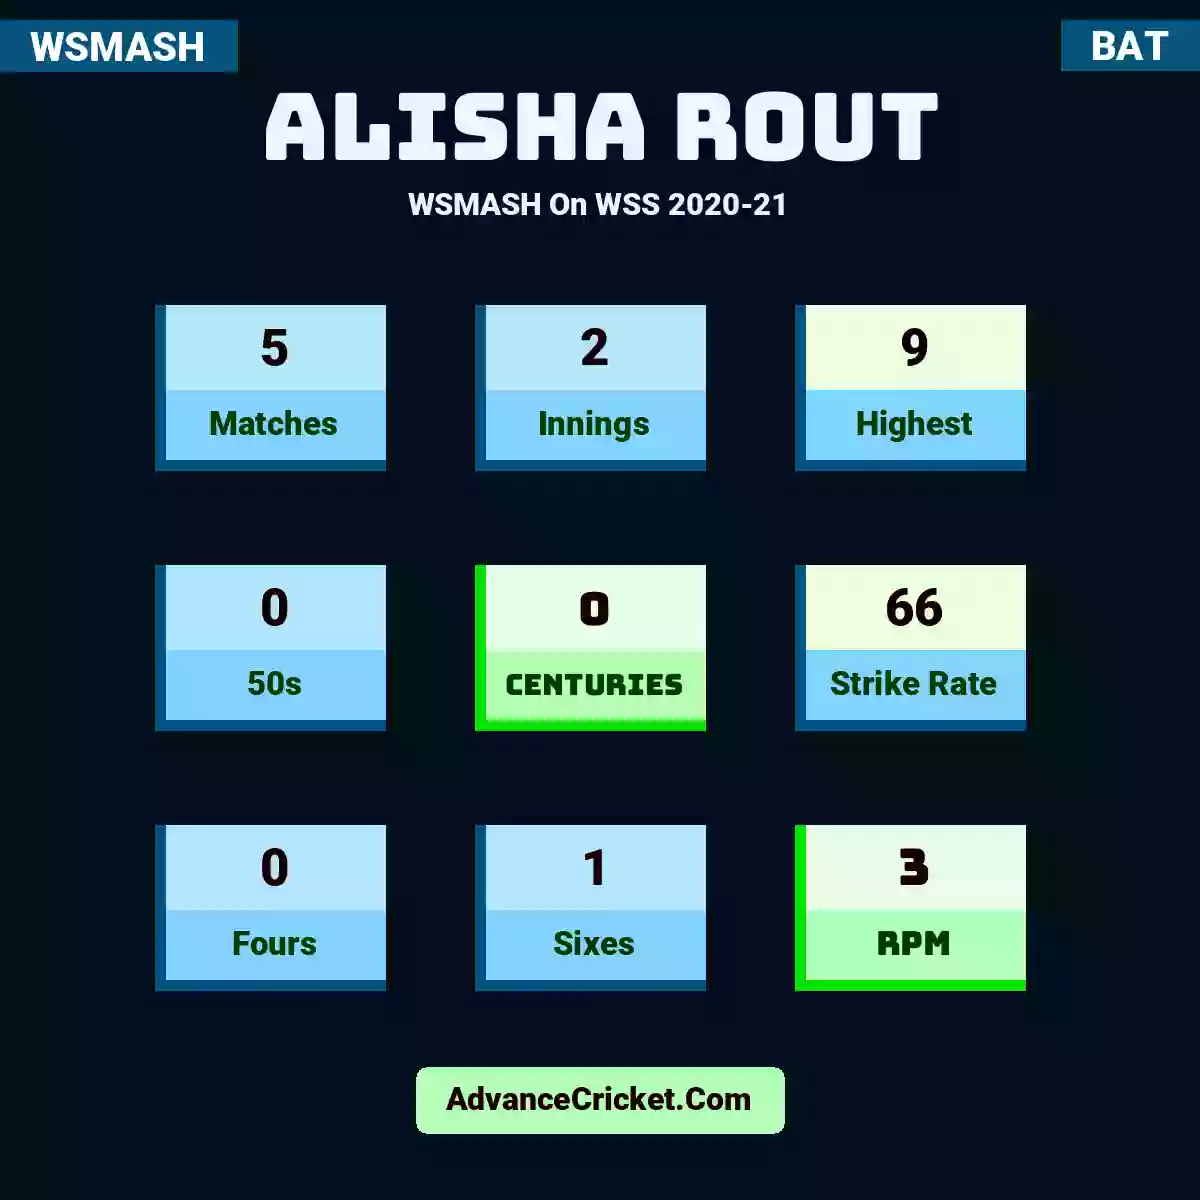 Alisha Rout WSMASH  On WSS 2020-21, Alisha Rout played 5 matches, scored 9 runs as highest, 0 half-centuries, and 0 centuries, with a strike rate of 66. A.Rout hit 0 fours and 1 sixes, with an RPM of 3.